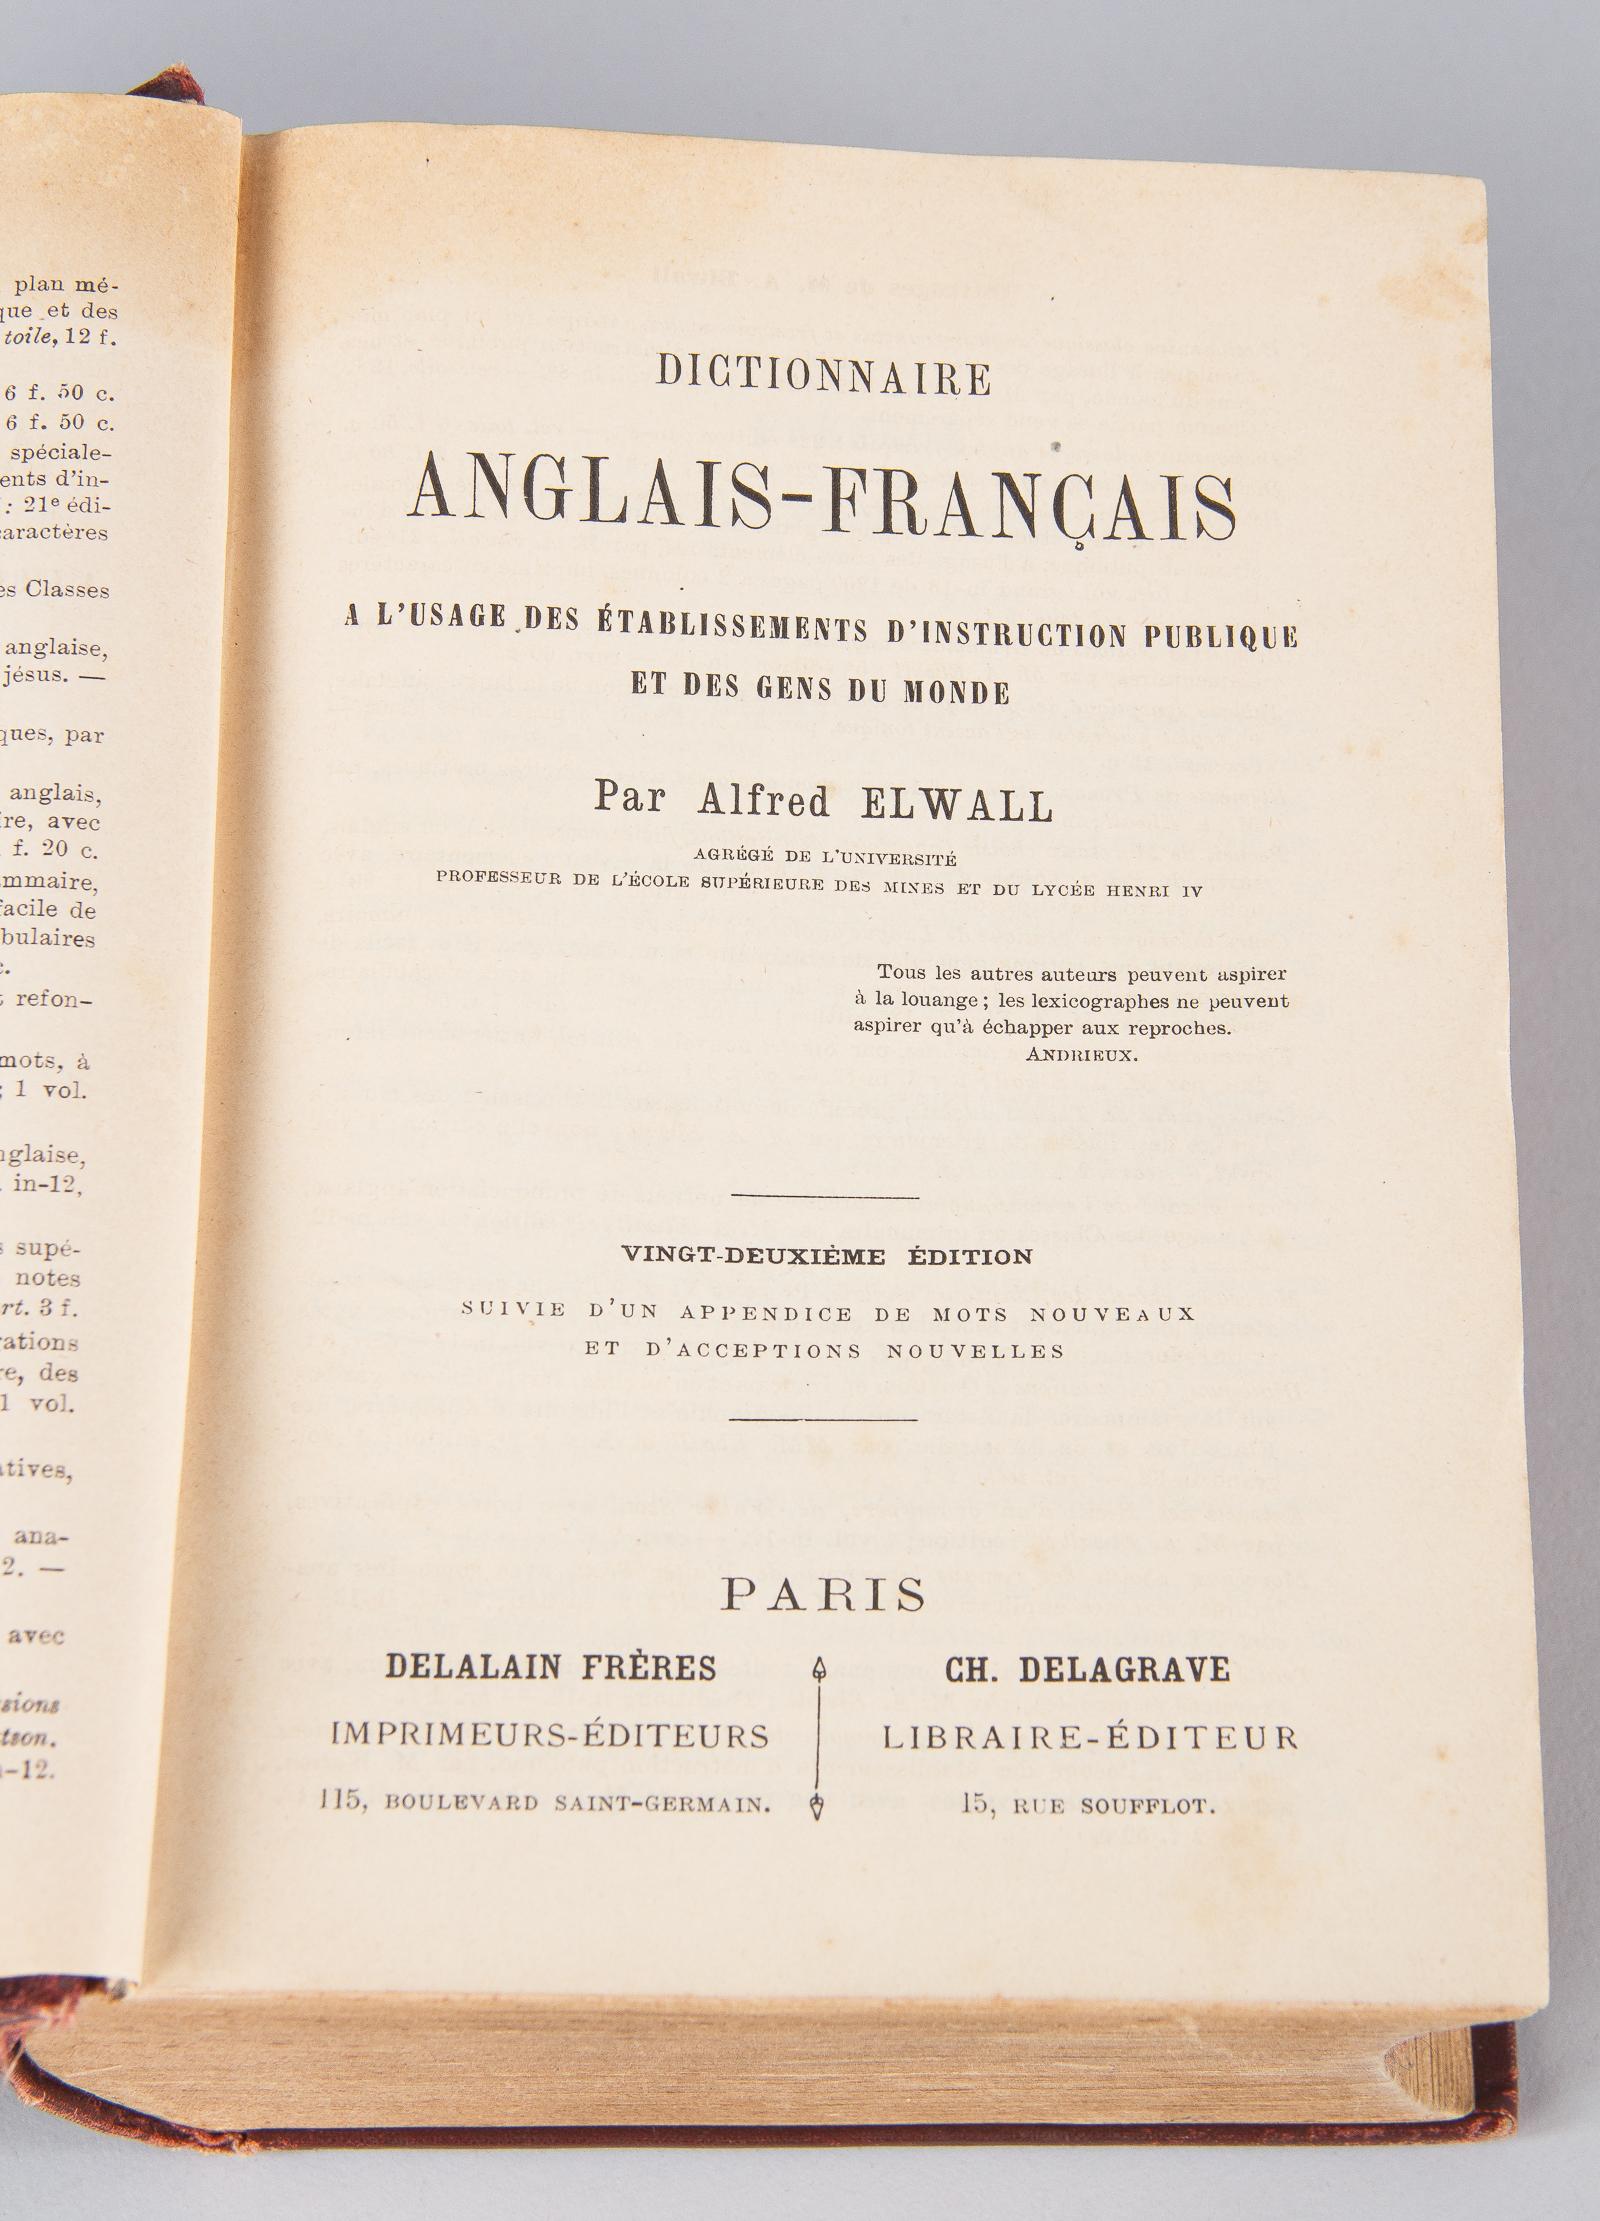 French Book-Dictionnaire Anglais-Francais by Alfred Elwall, 1901 4